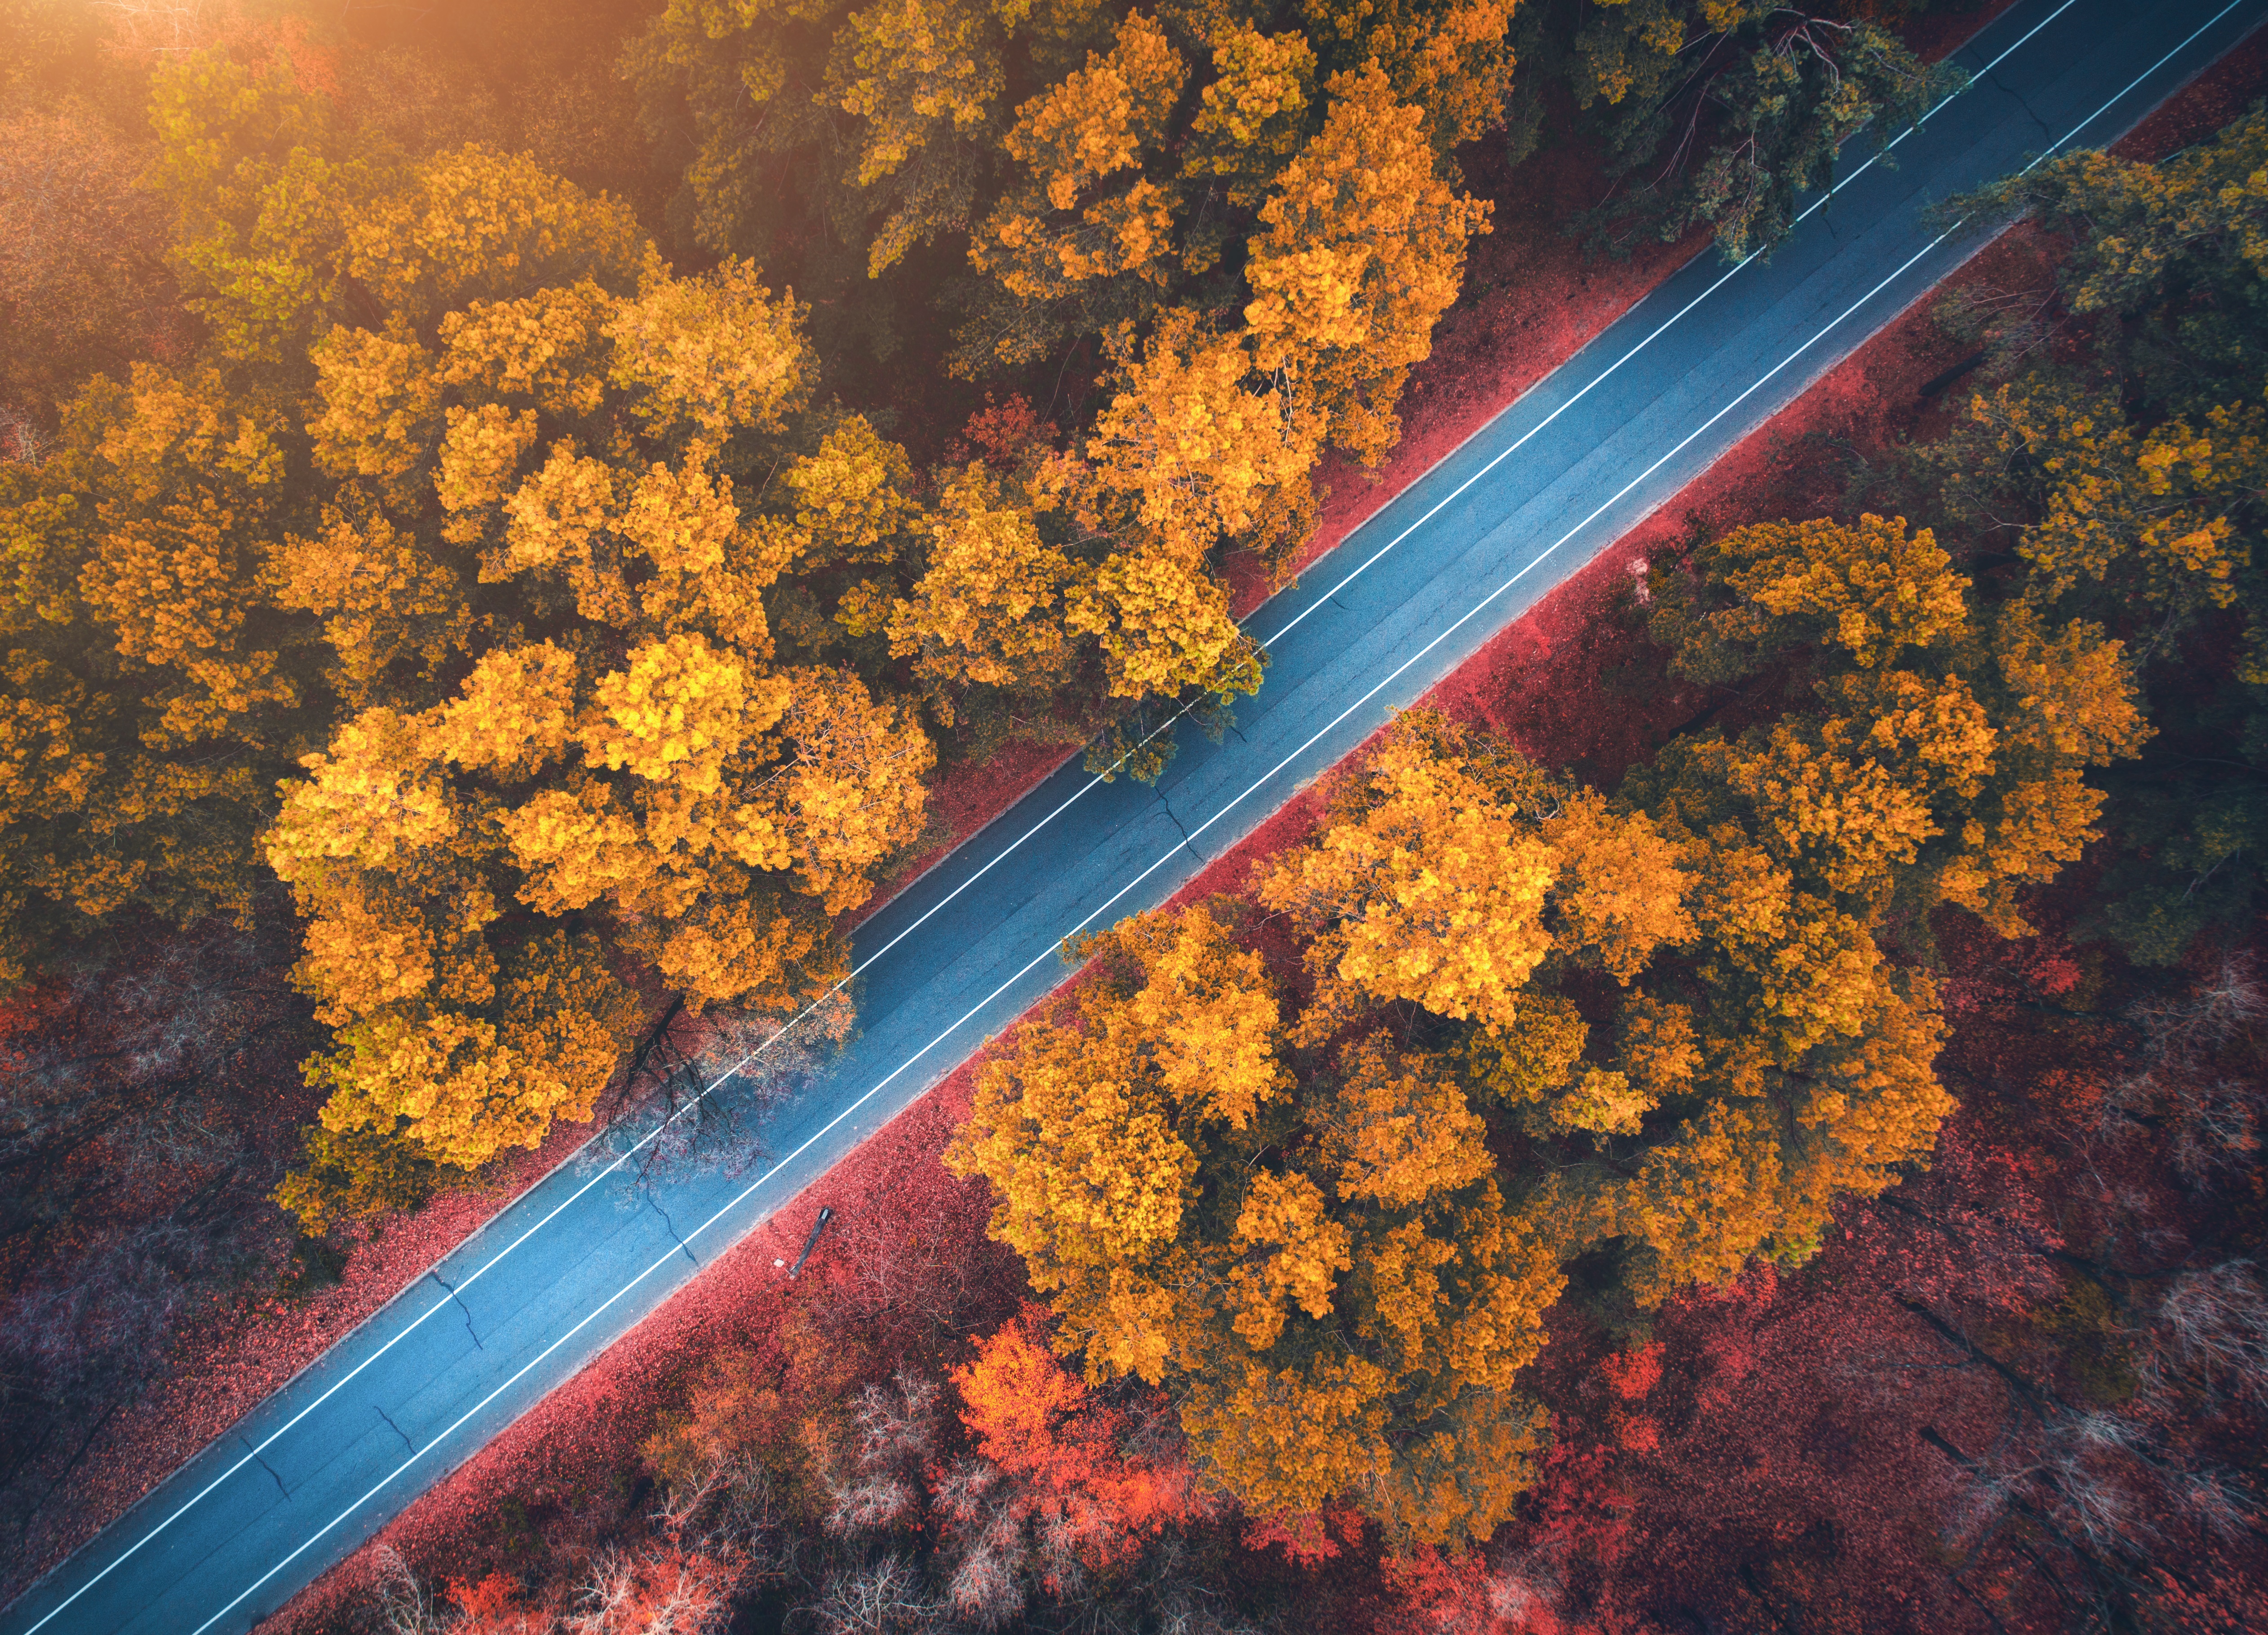 General 5048x3640 forest road fall nature orange top view aerial view sunlight foliage trees